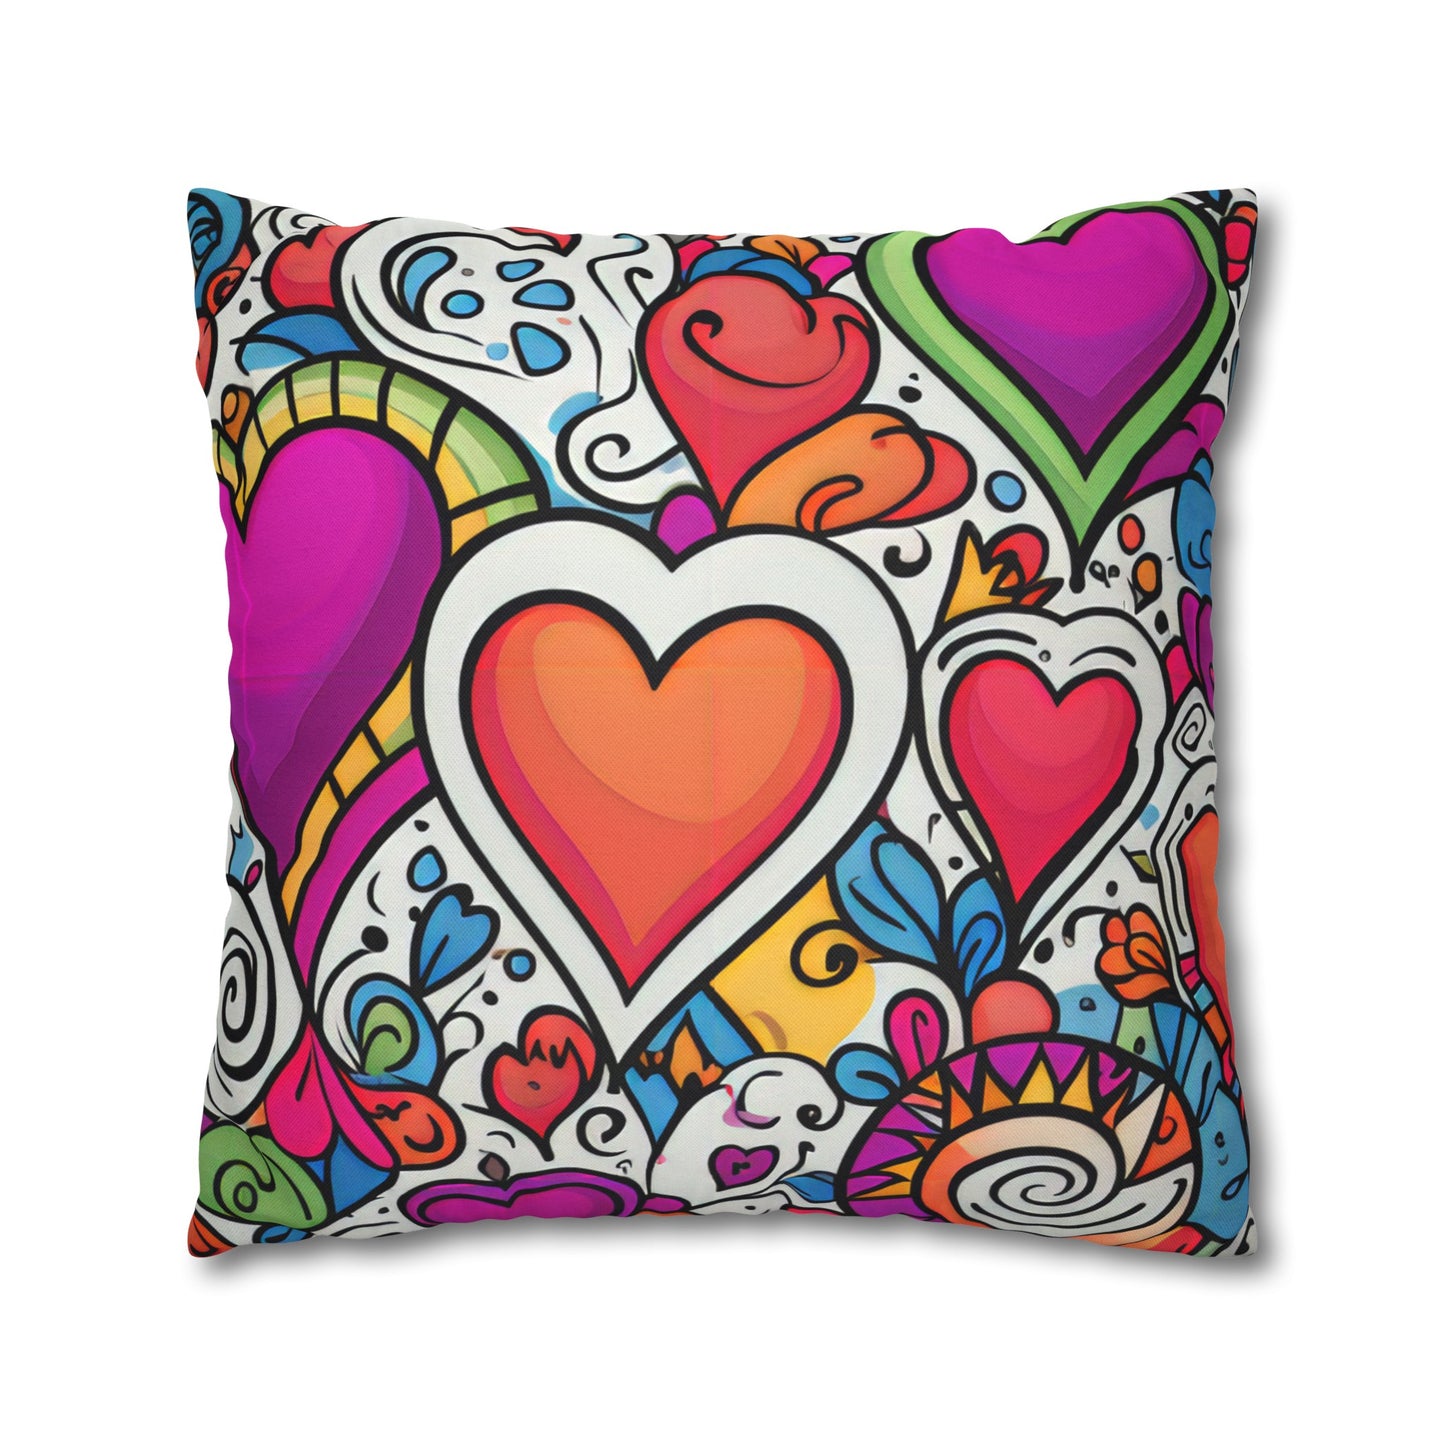 Field of Hearts Pillow Cover